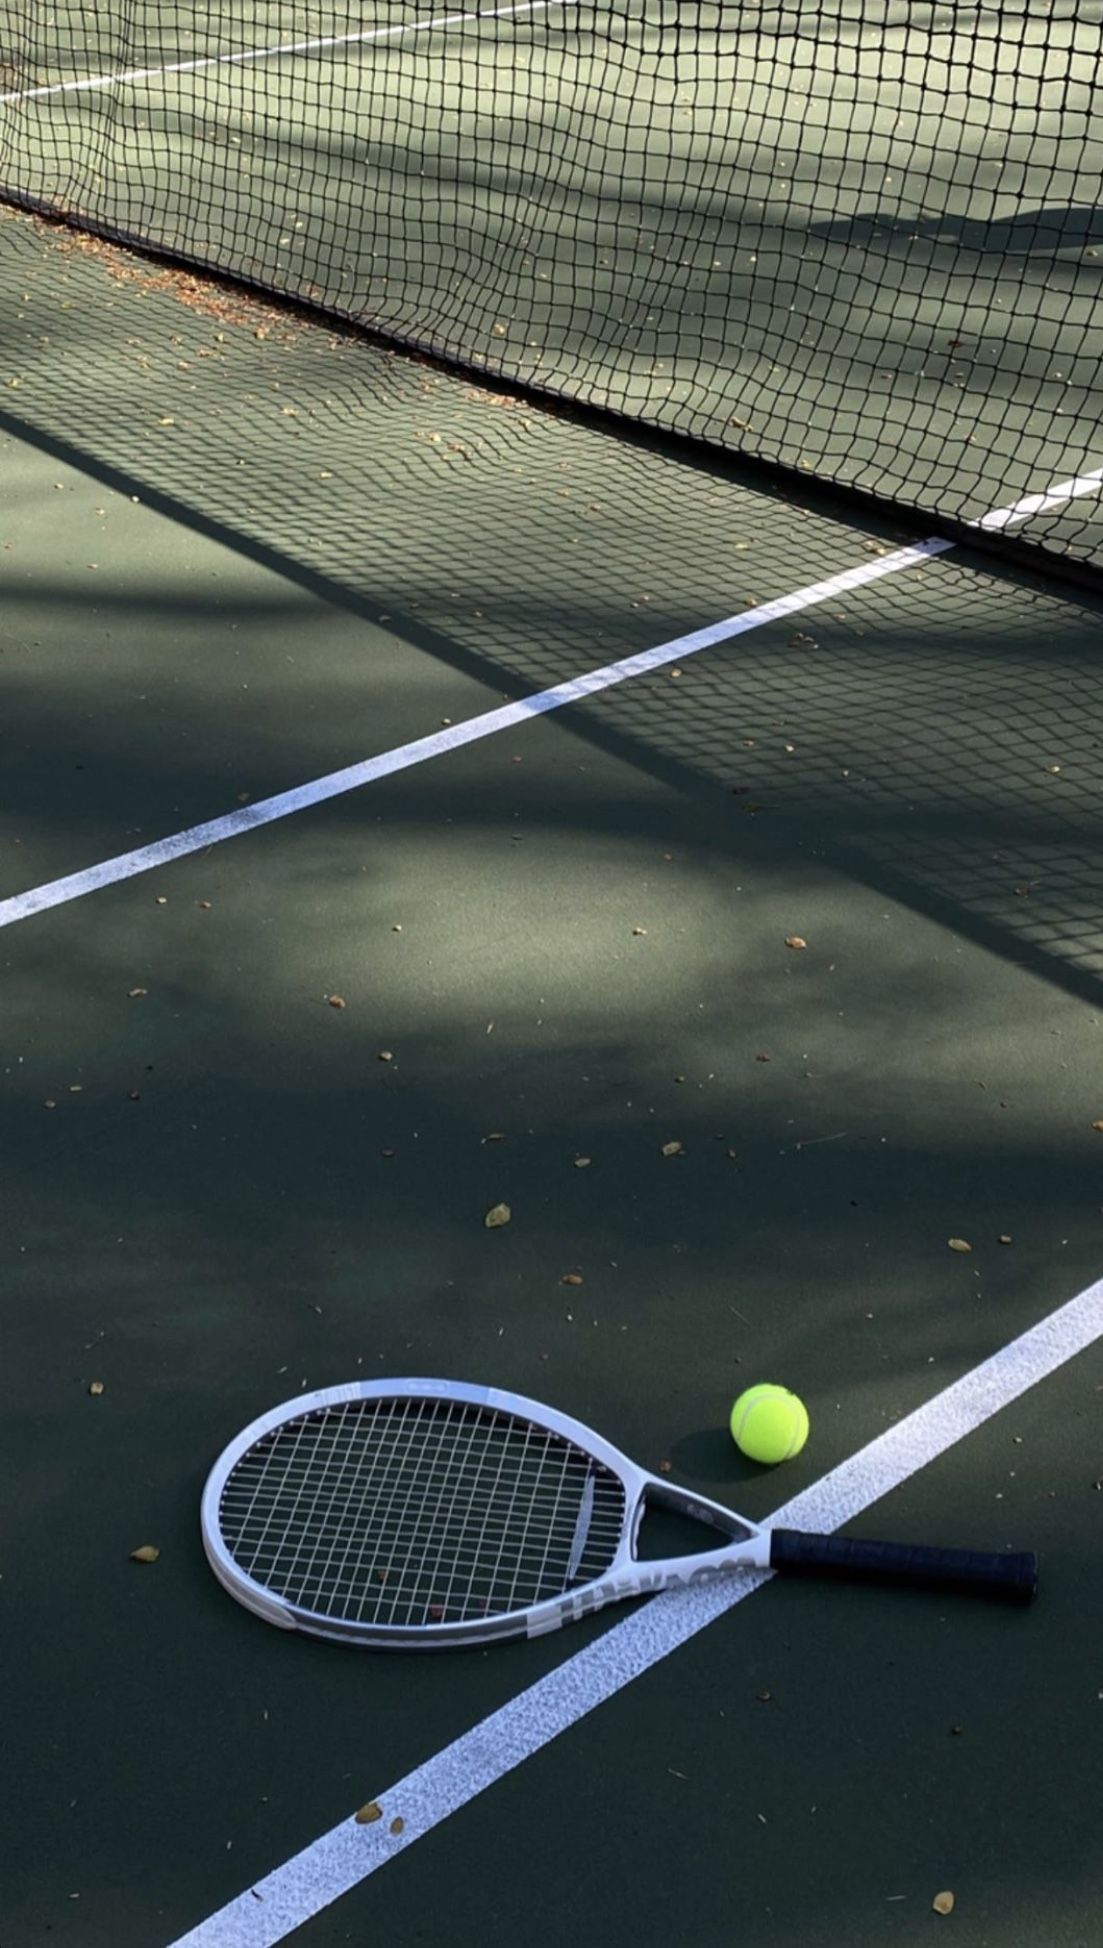 A tennis racket and ball on the court - Tennis